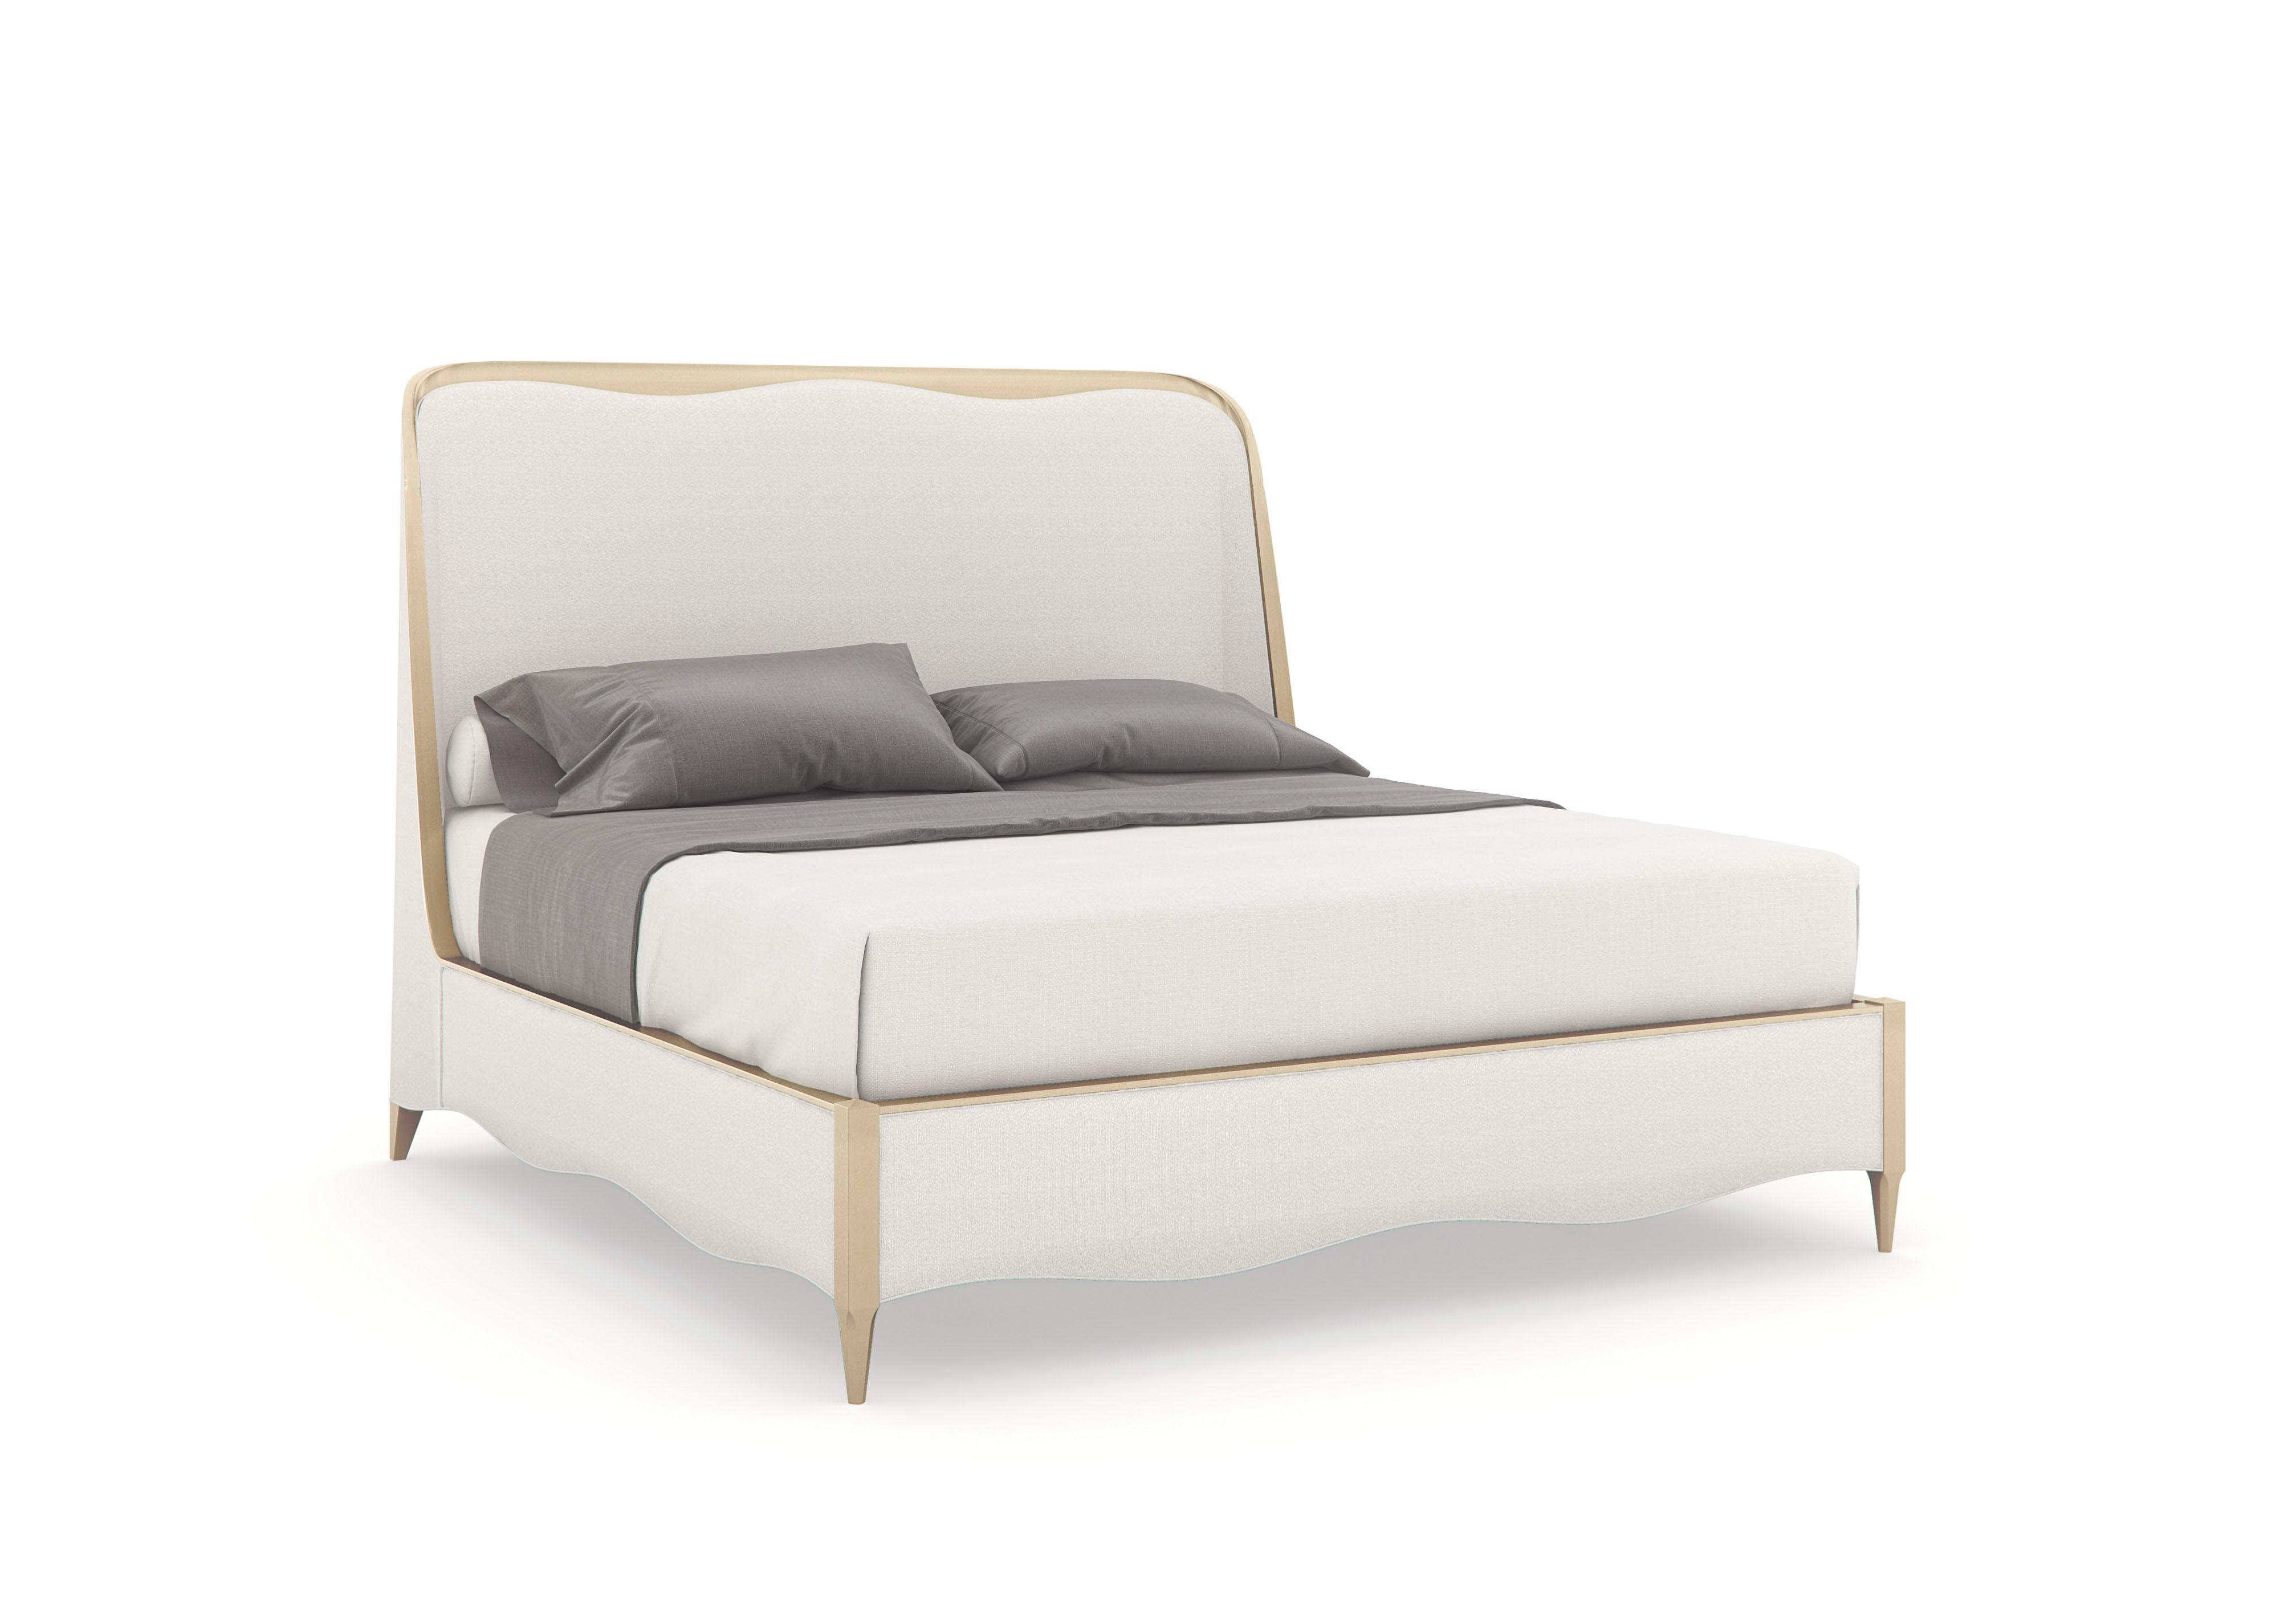 Contemporary Platform Bed Deep Sleep CLA-020-142 in Light Gray, Champagne Fabric